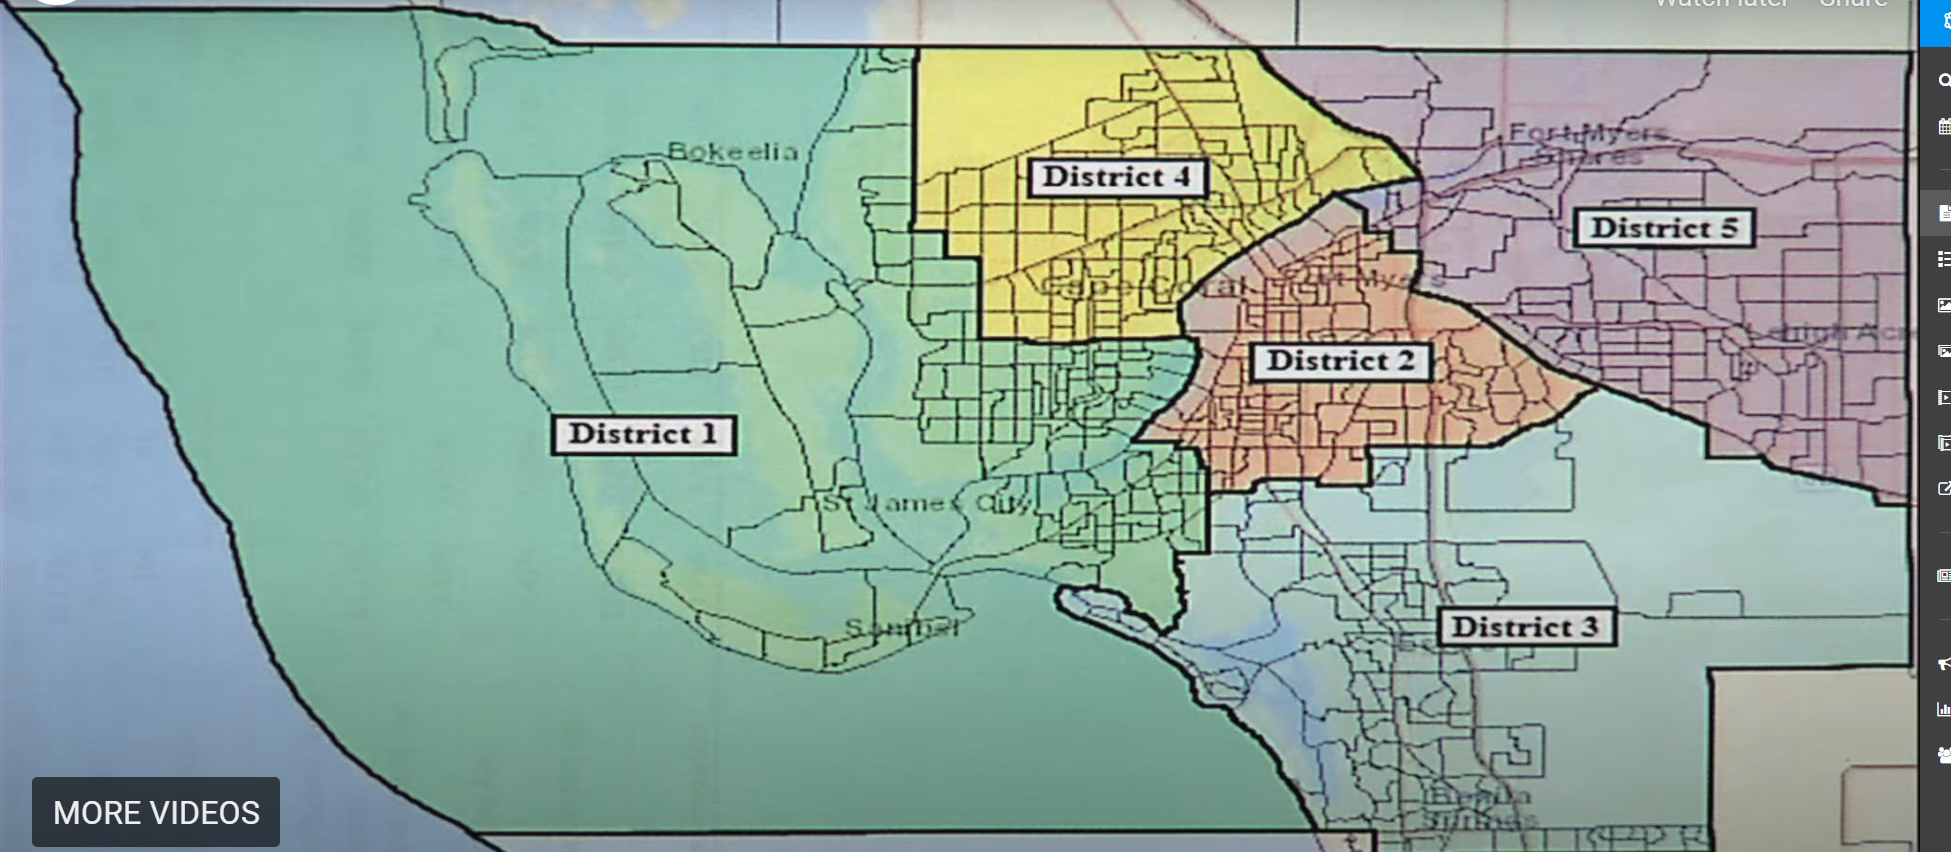 Lee County redistricting maps alternatives considered